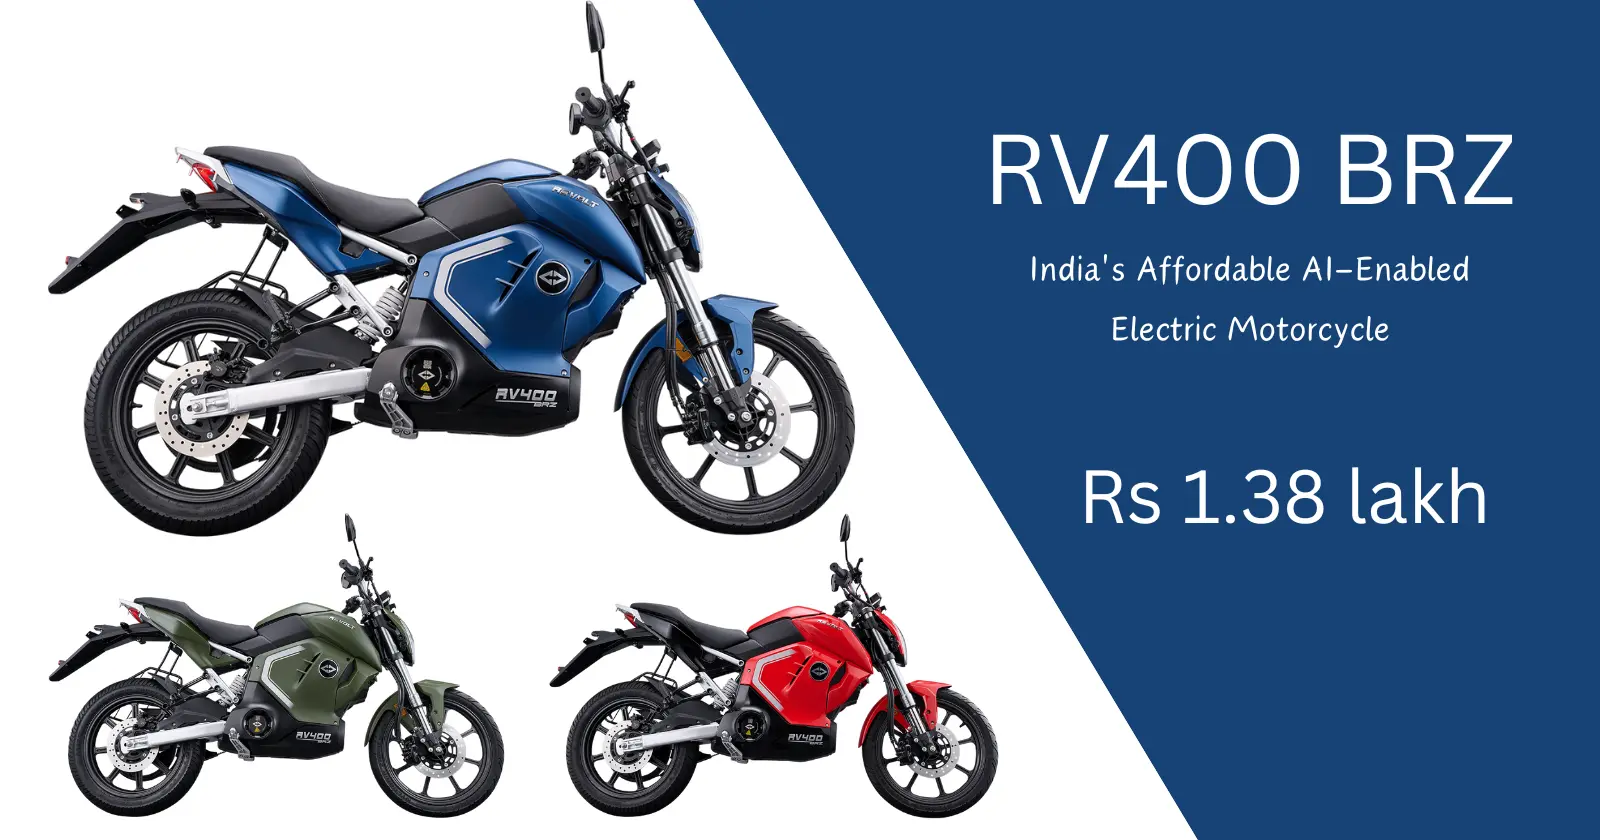 Revolt Motors Unveils the RV400 BRZ, India’s Affordable AI-Enabled Electric Motorcycle